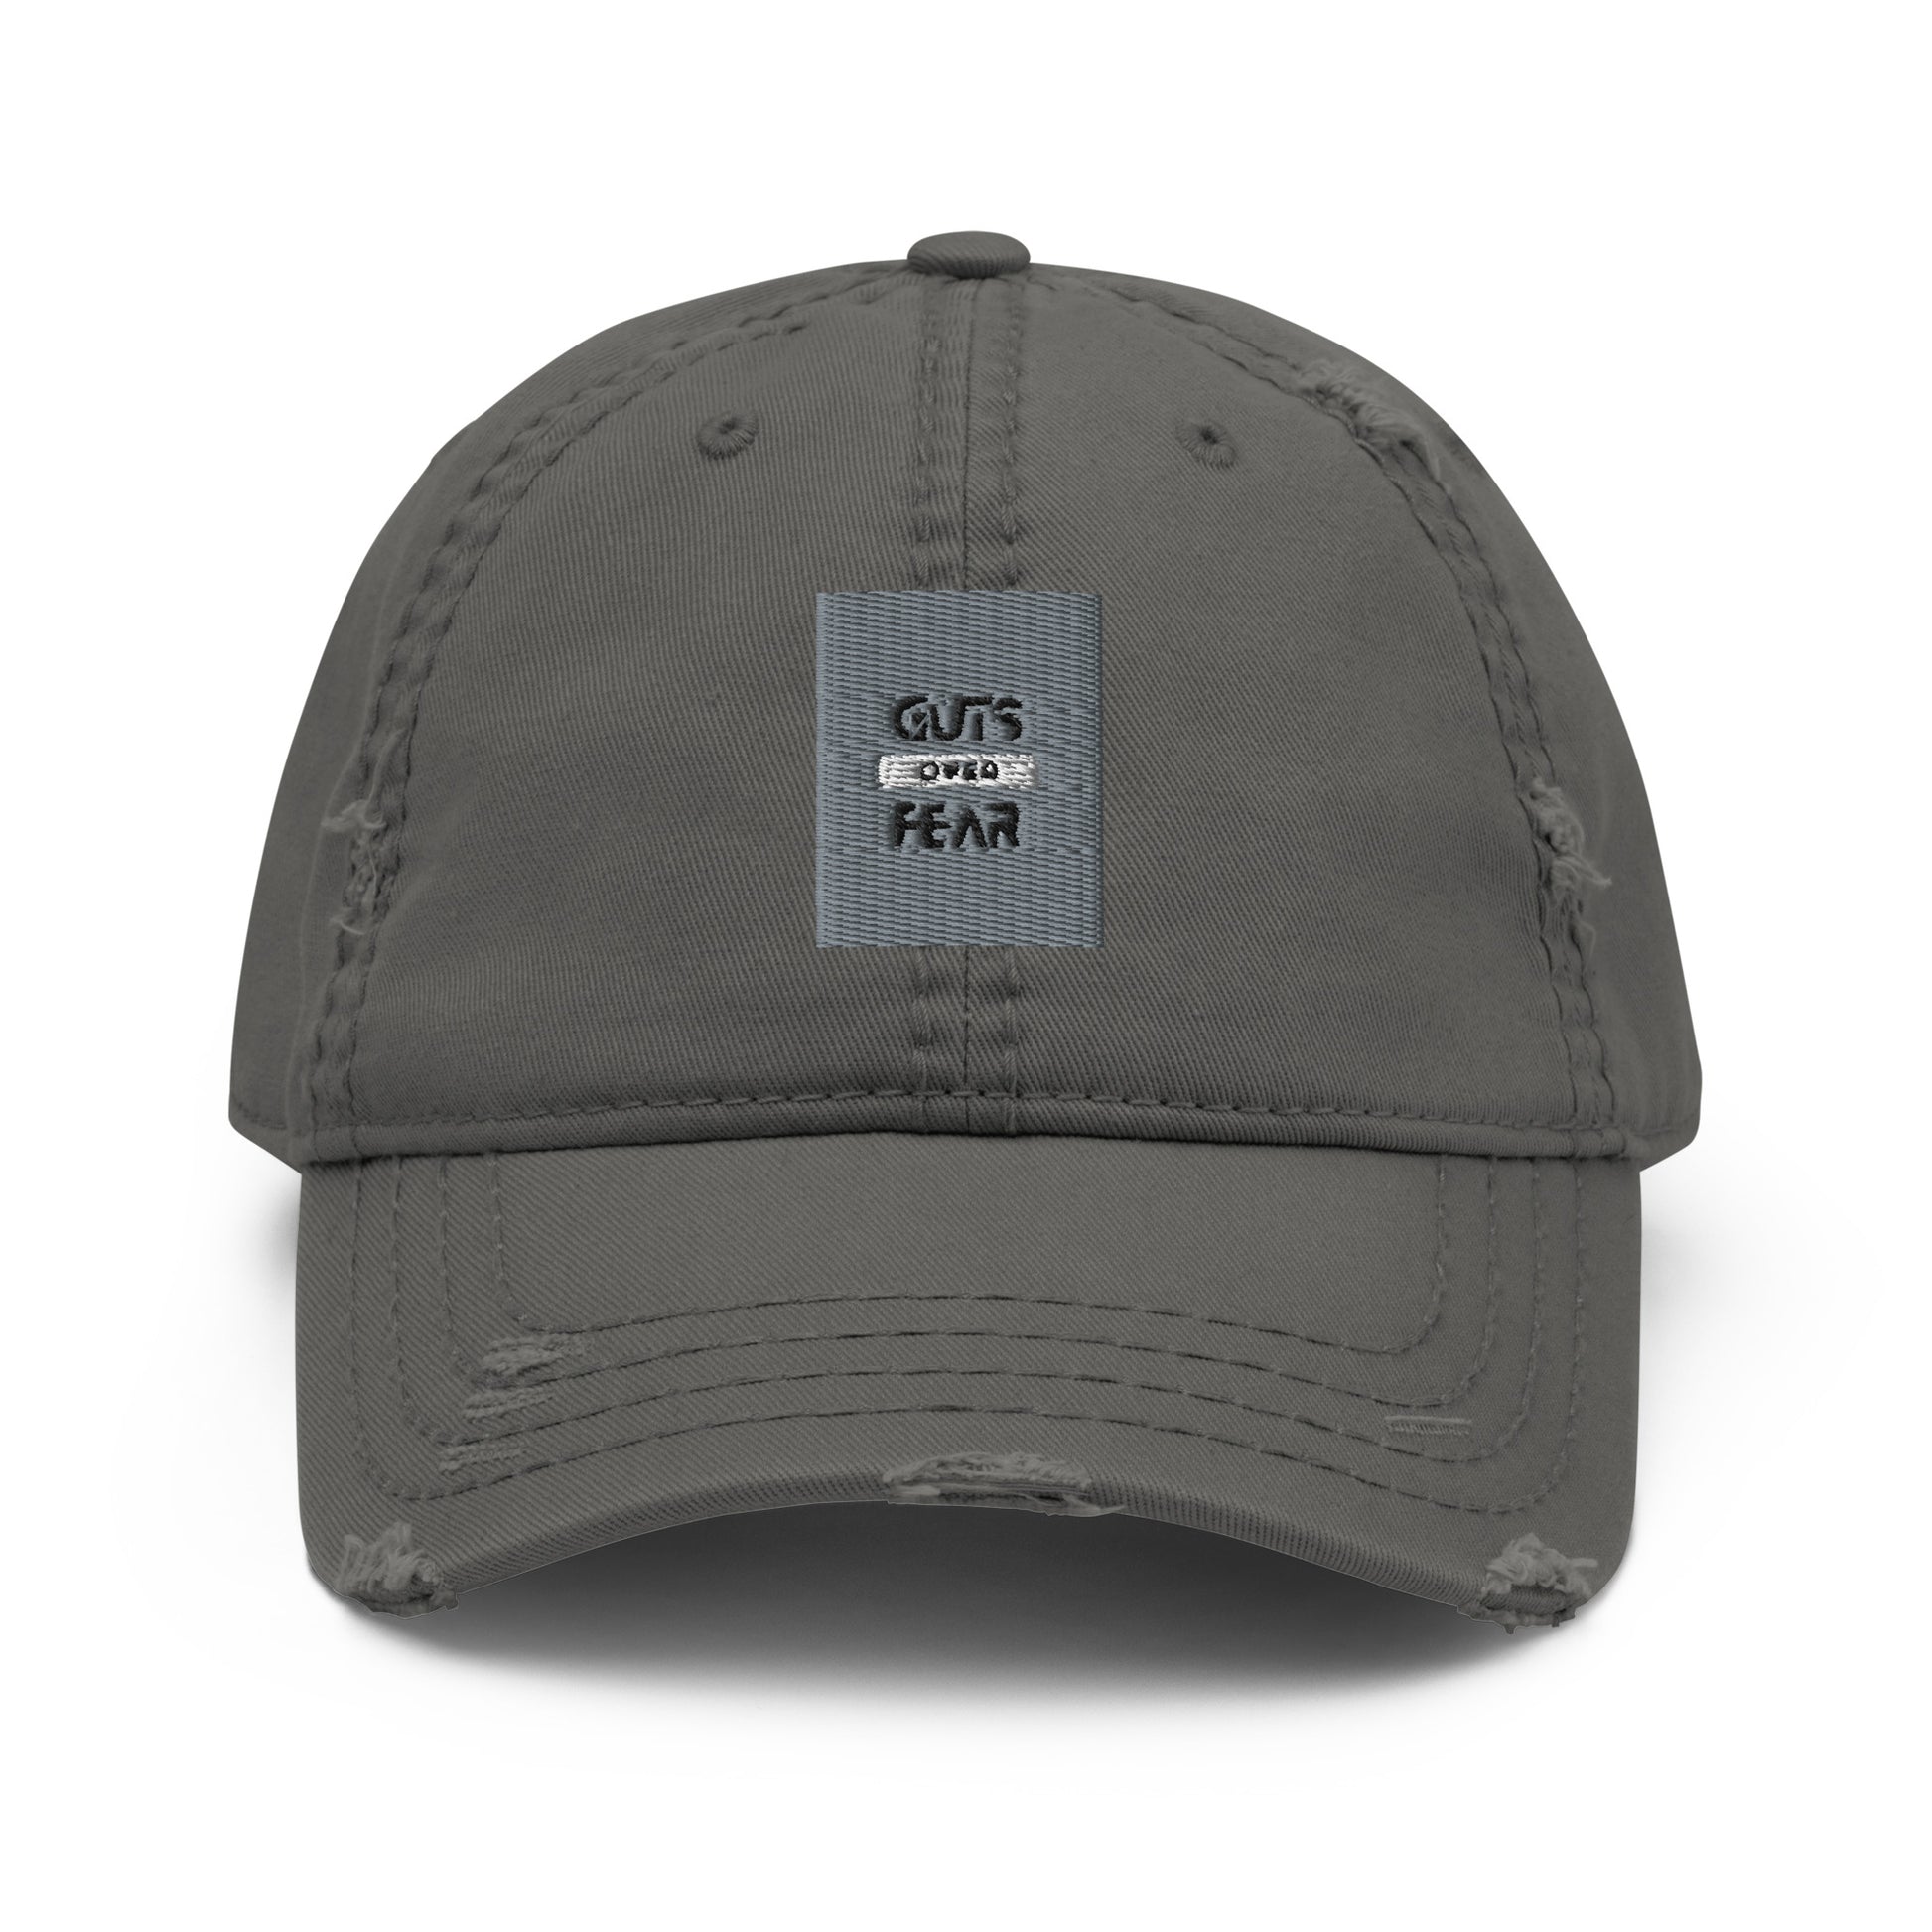 Image of a grey dad hat with the logo 'Guts Over Fear' embroidered in black thread on the front. The hat has a curved brim and an adjustable strap at the back for a comfortable fit."